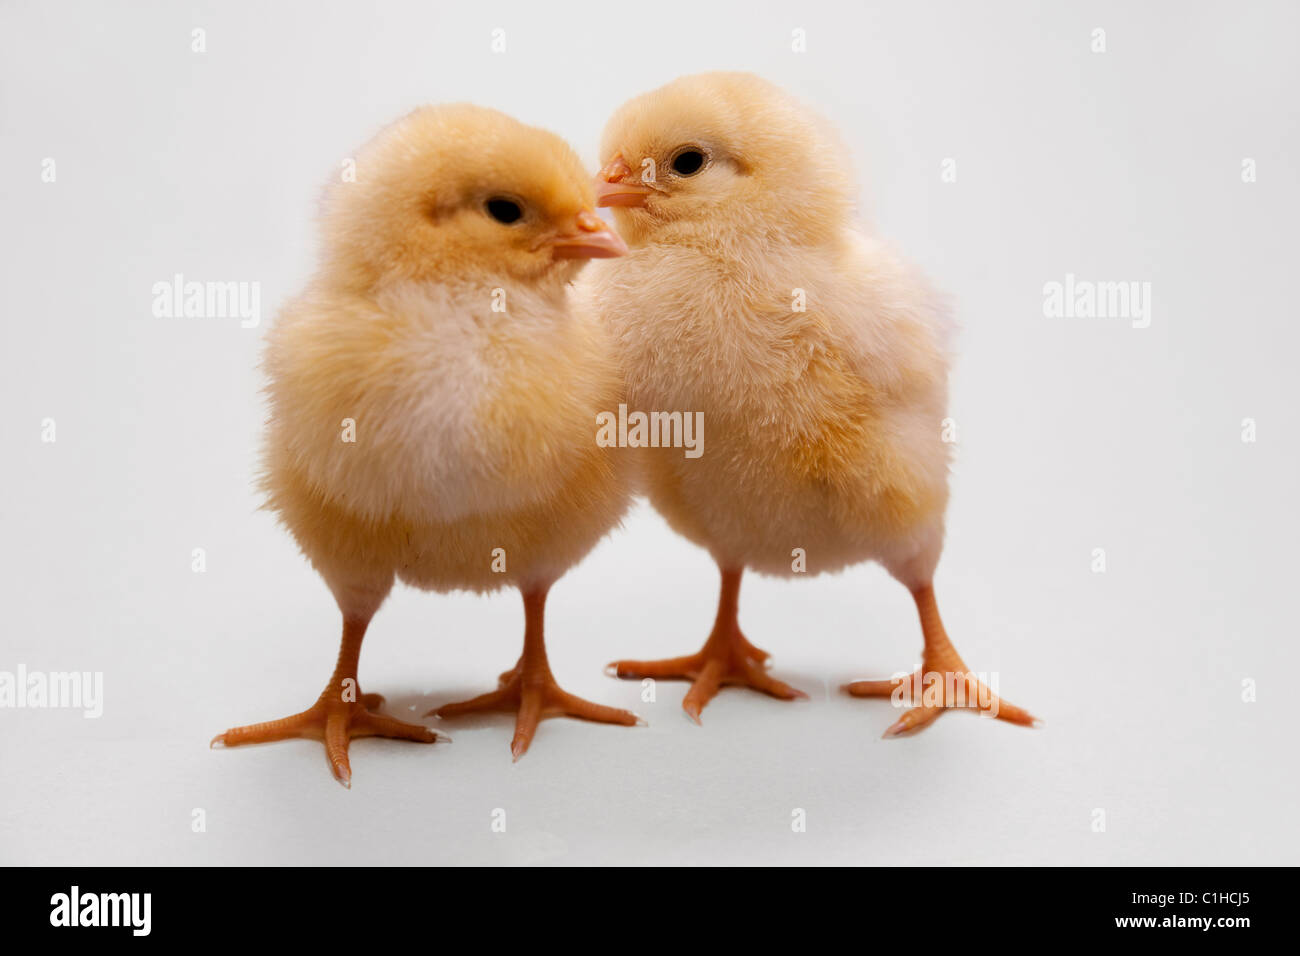 two cute one day old yellow chicken chicks Stock Photo